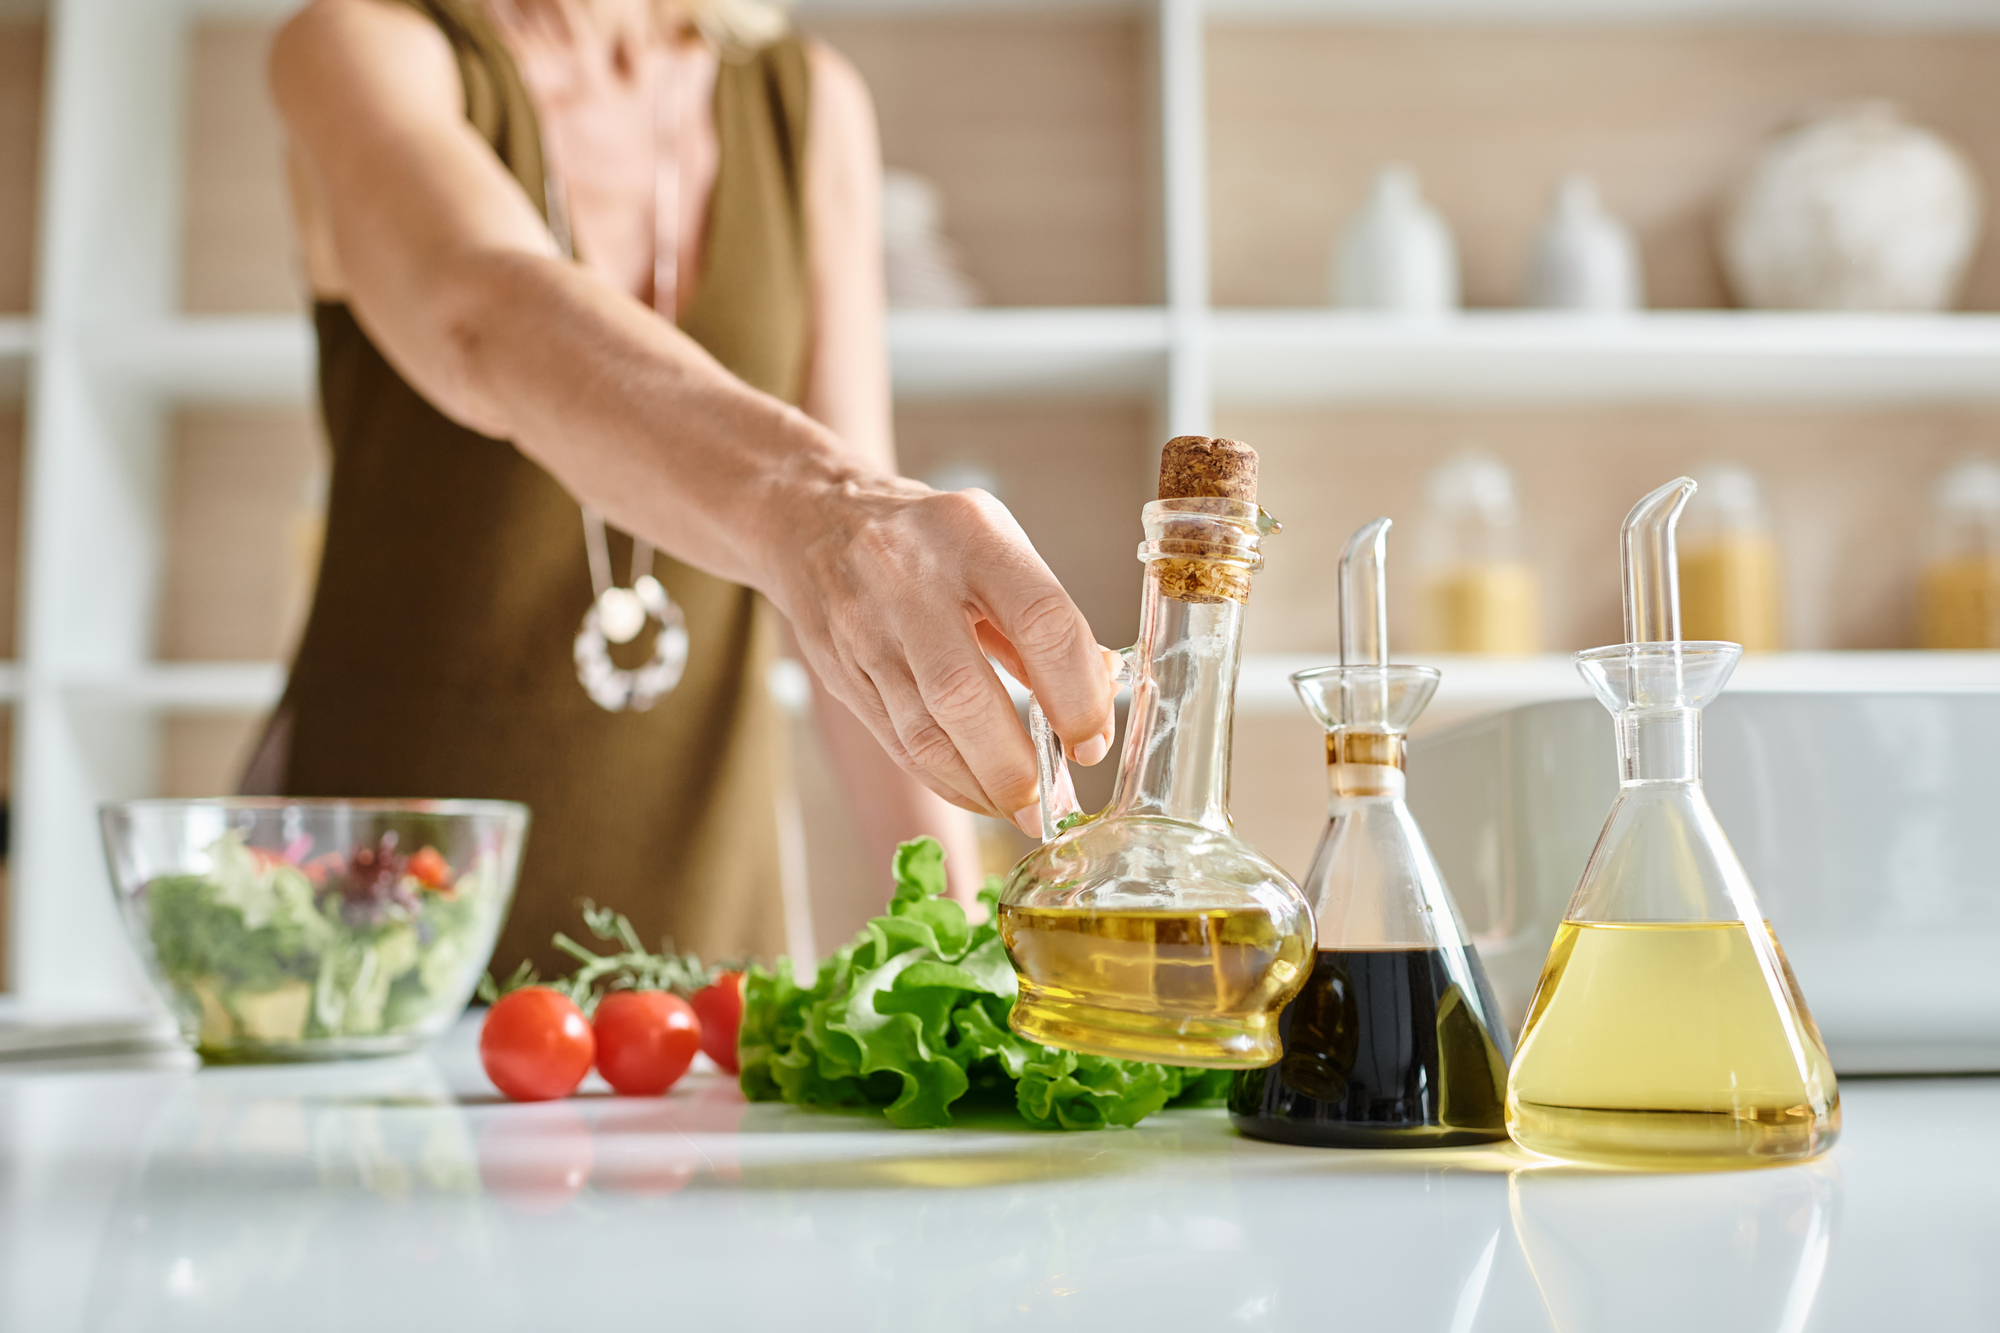 14 Uses for Vinegar That Have Nothing to Do With Cooking